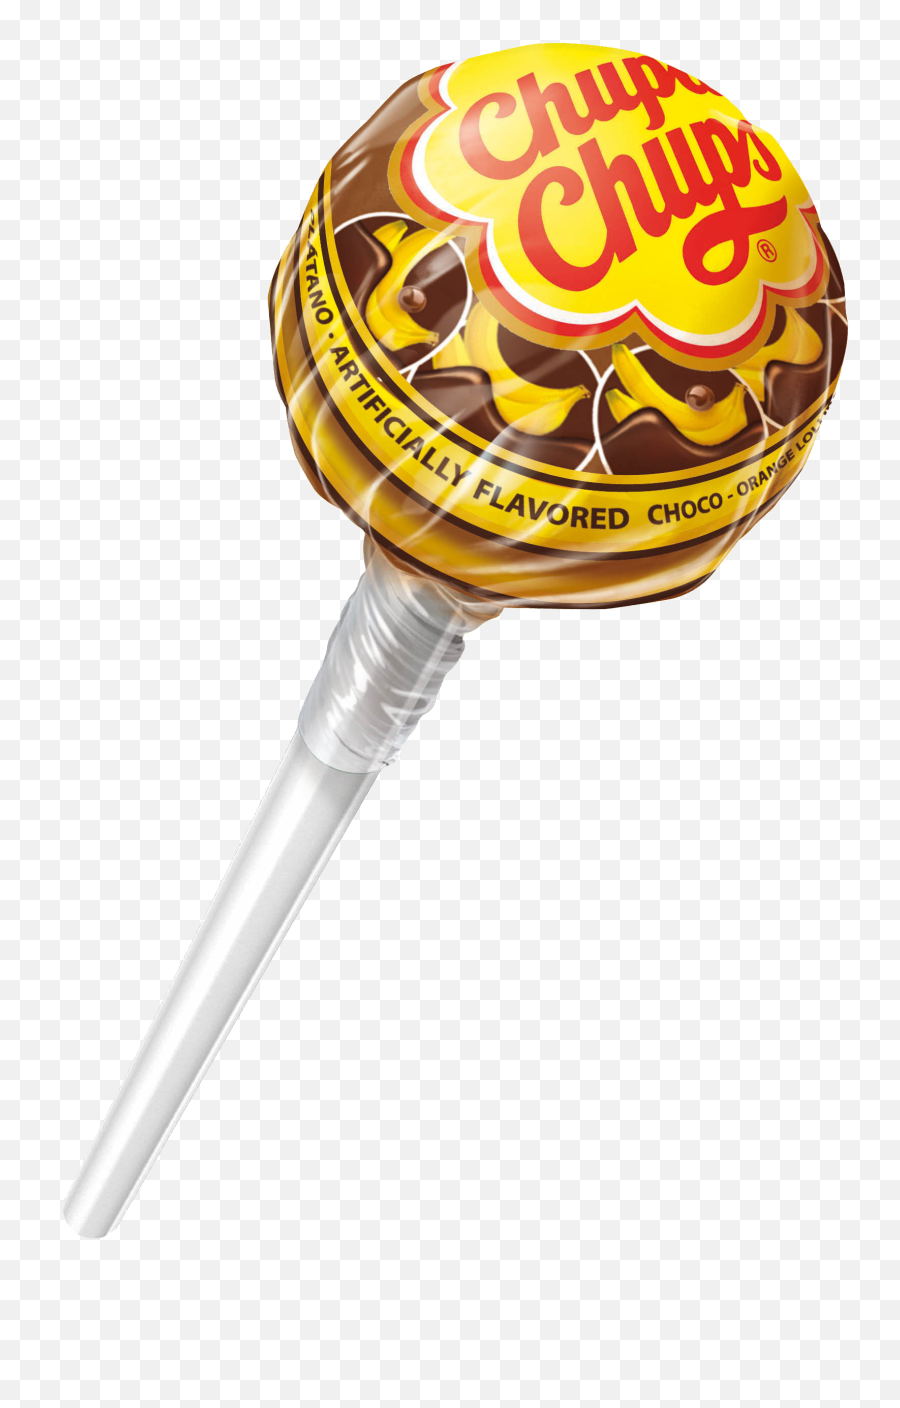 Png Images Transparent Background - Chupa Chups Lollipop Png,Lollipop Transparent Background